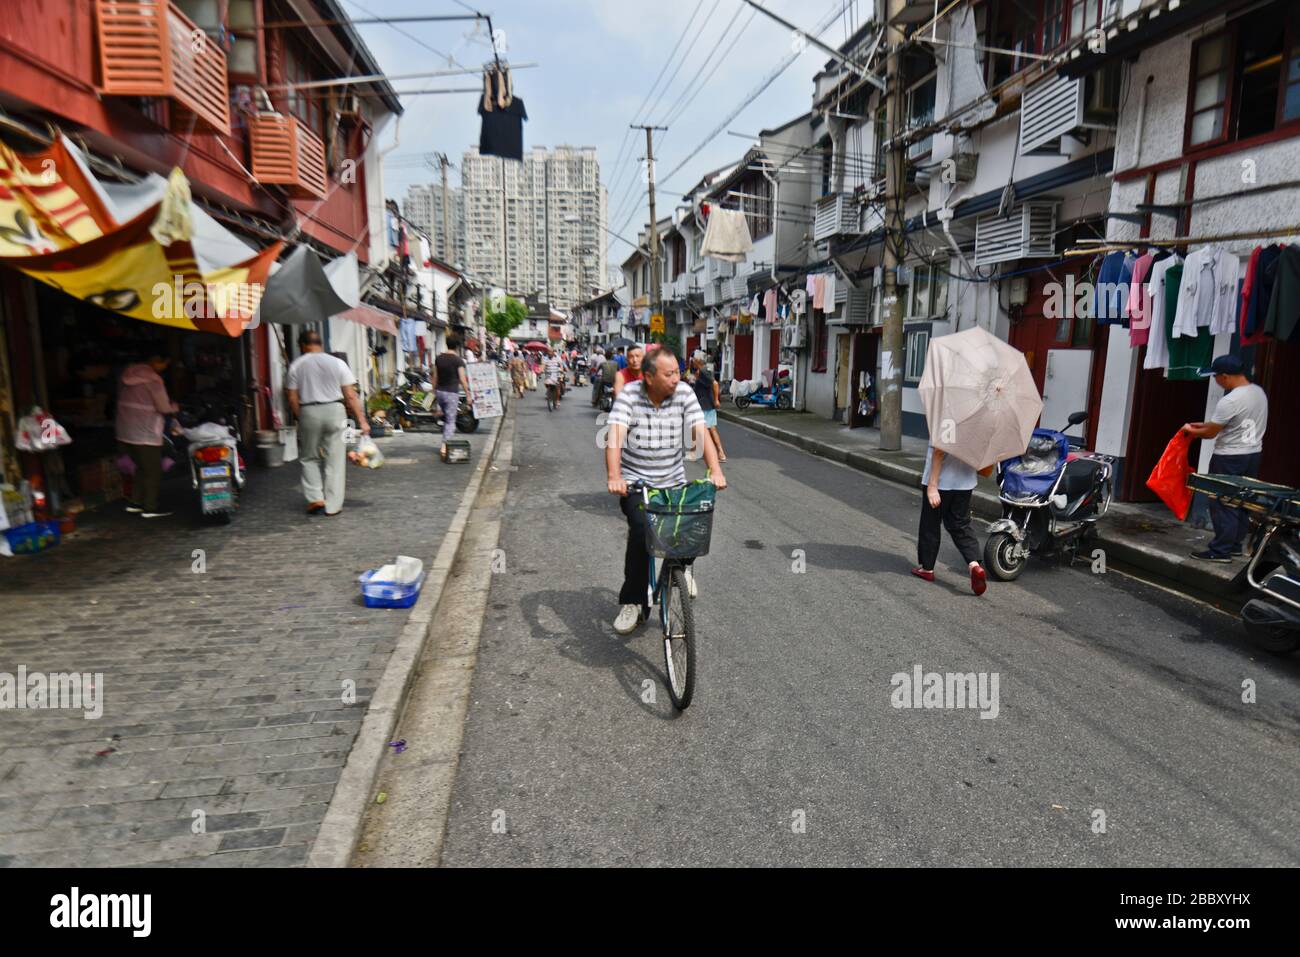 Shanghai Old Town Commercial Streets, Huangpu. China Stockfoto